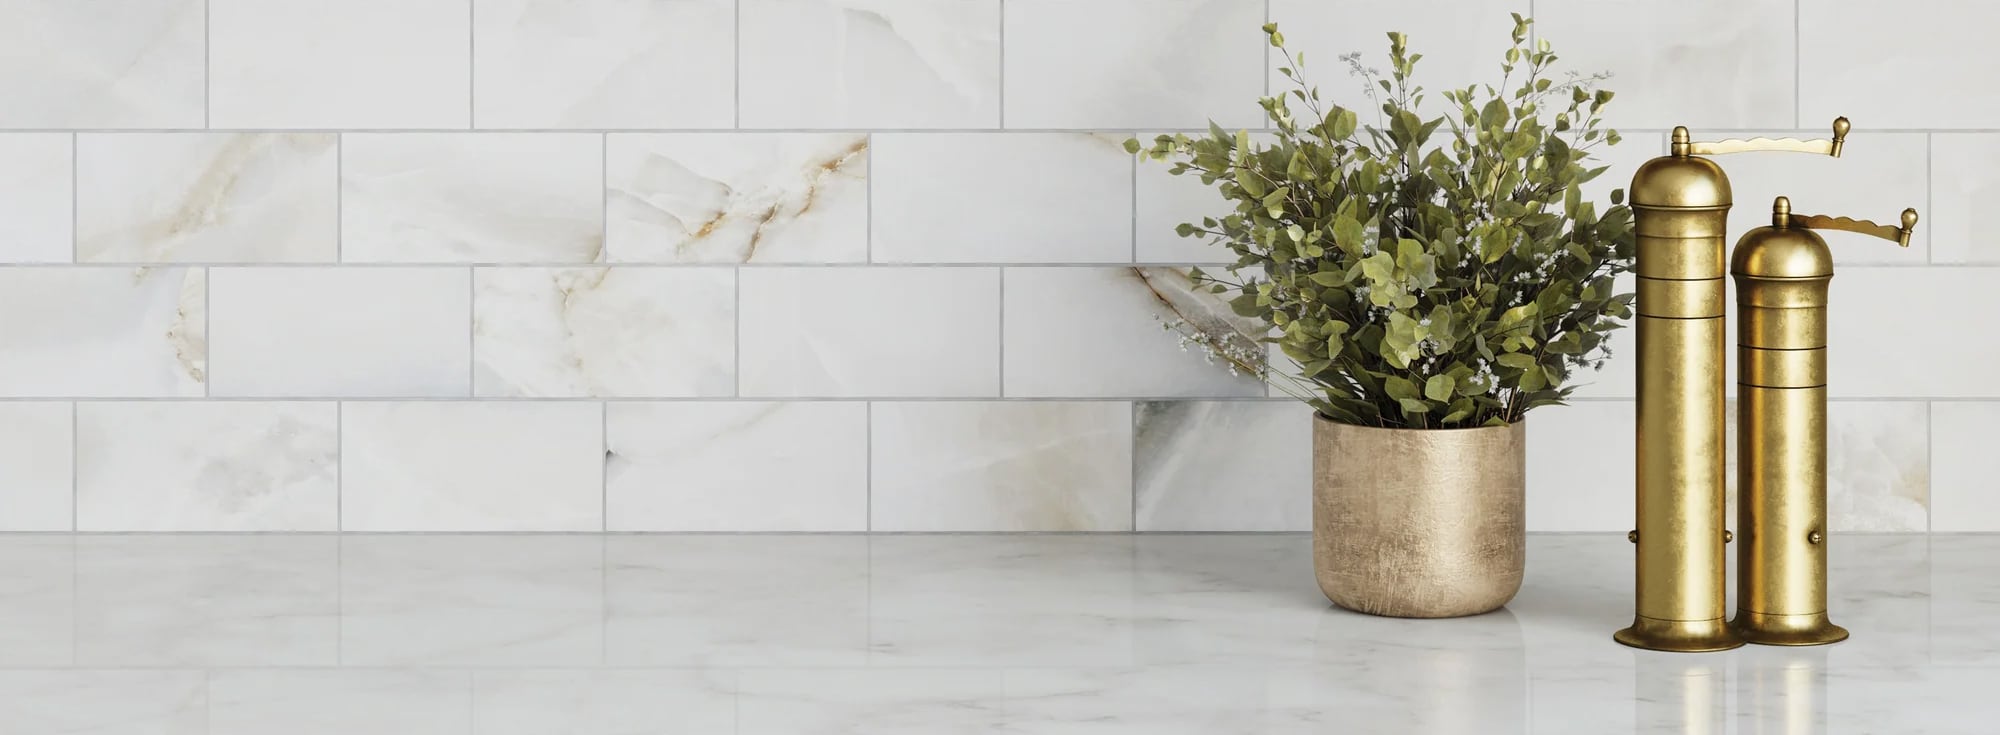 Elegant onyx look tile with subtle veining adds a touch of luxury to a sophisticated and airy interior